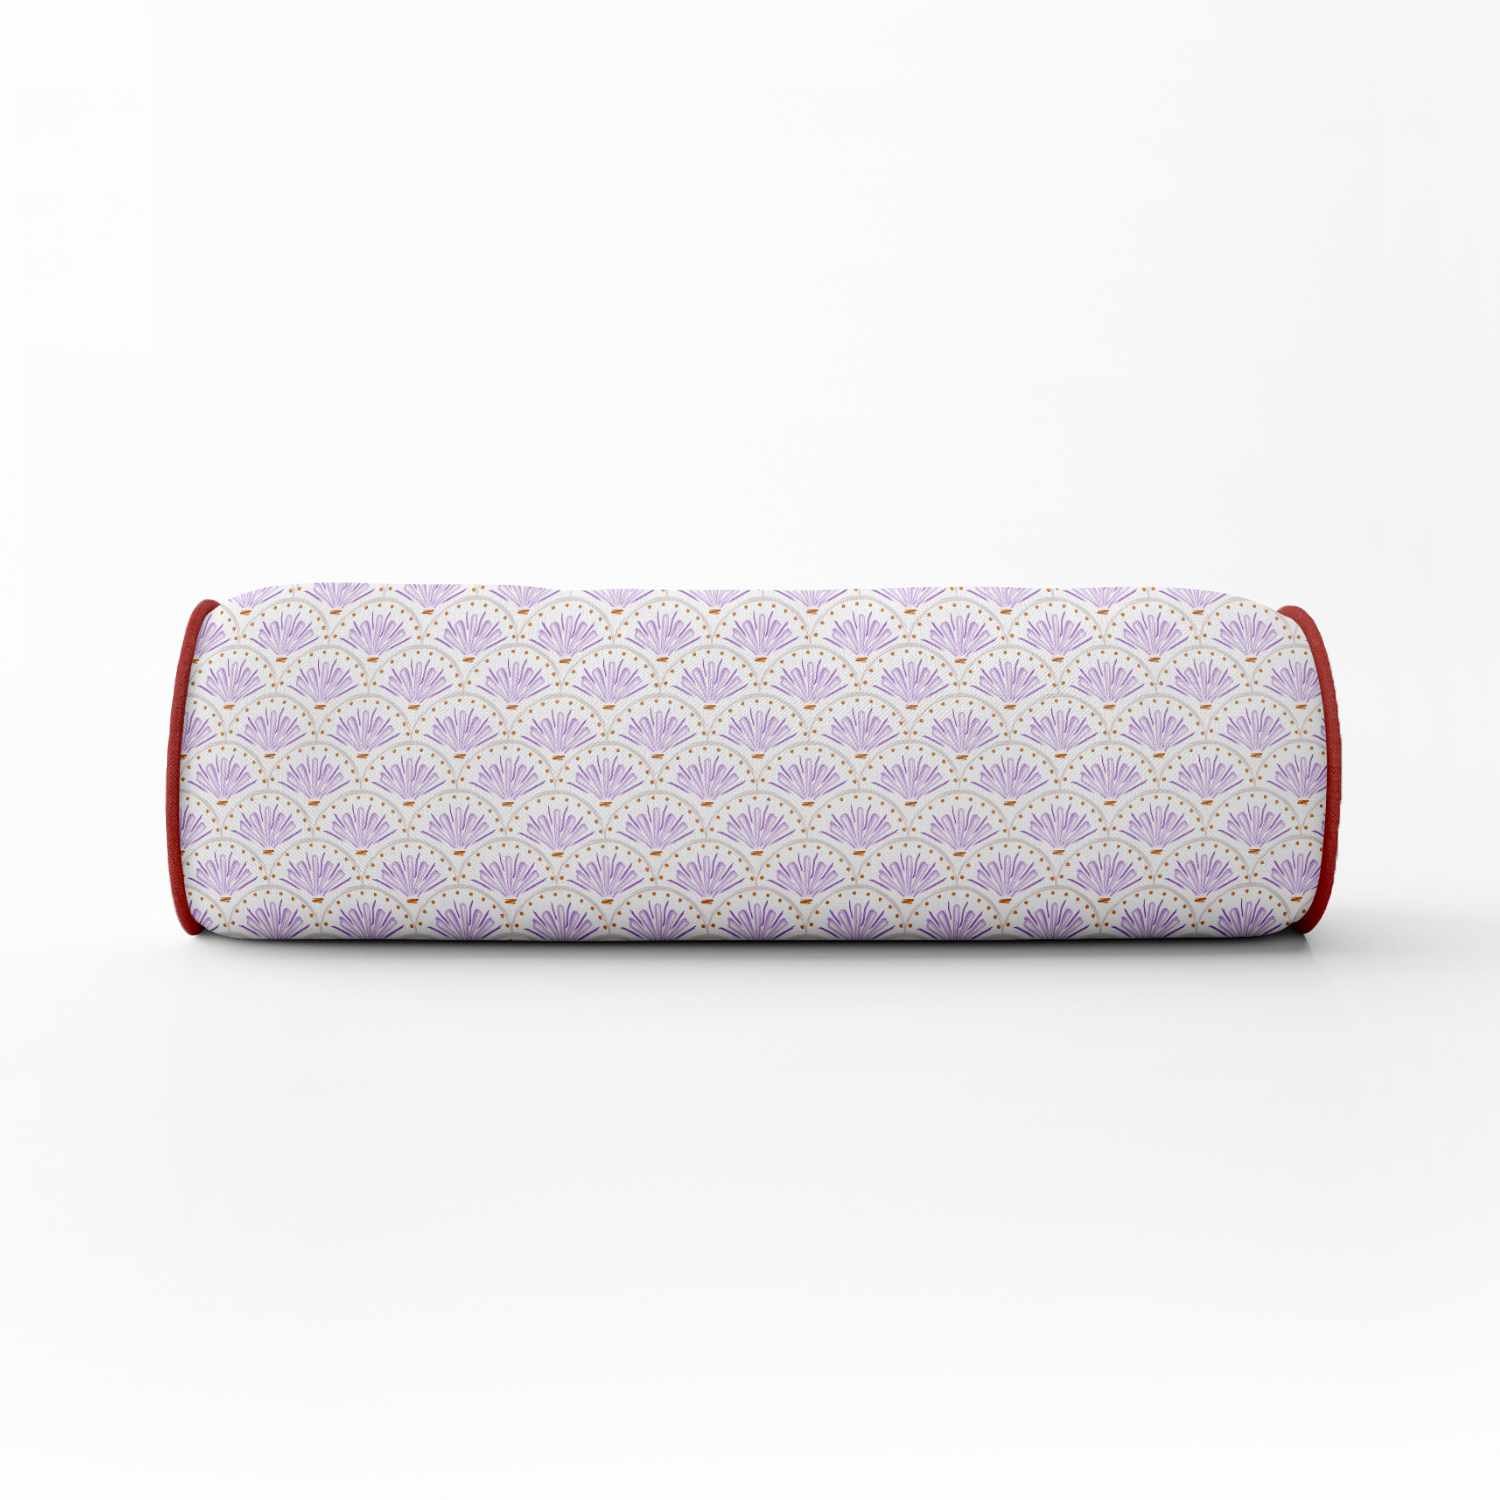 small-scale-purple-orange-flower-bolster-red-piping-142971.jpg